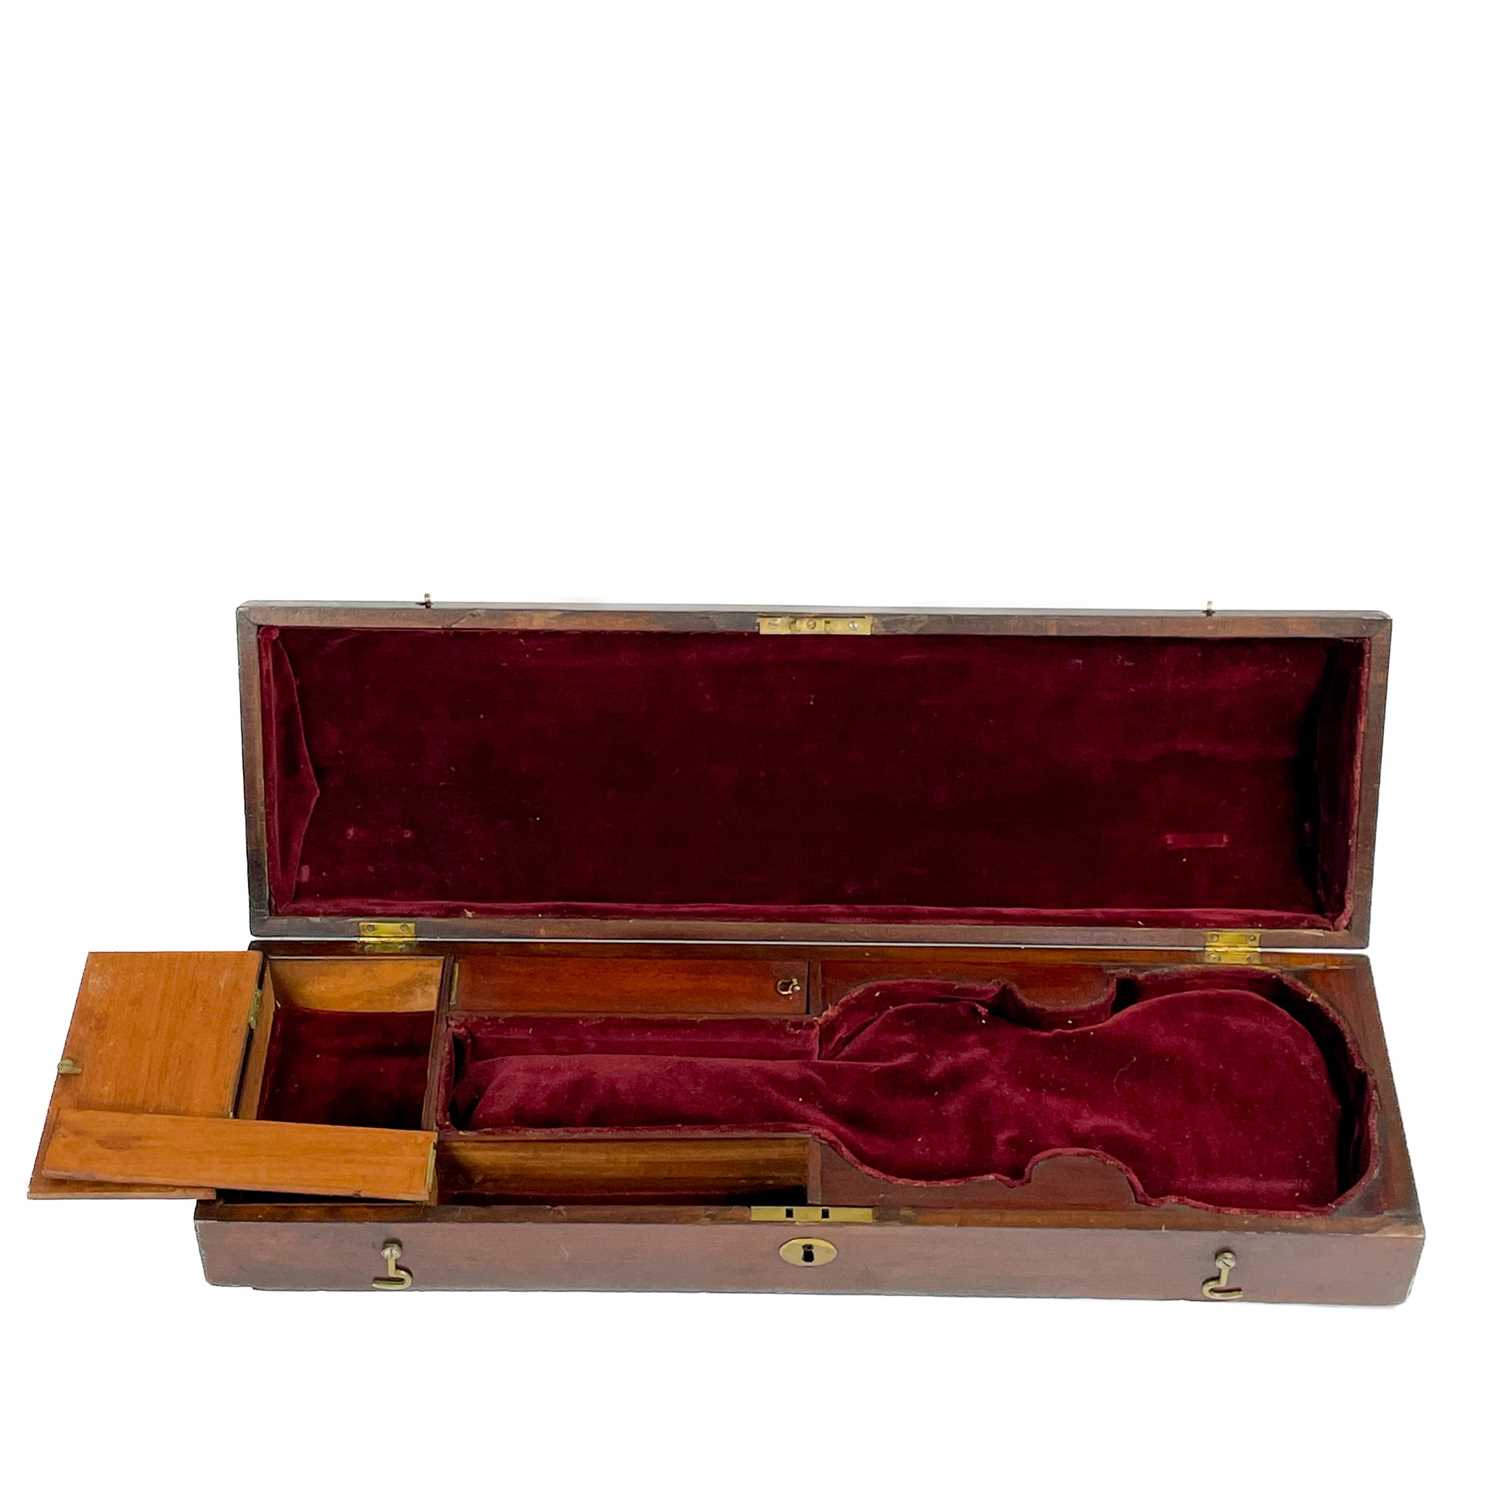 An early to mid 19th century mahogany violin case. - Image 4 of 4